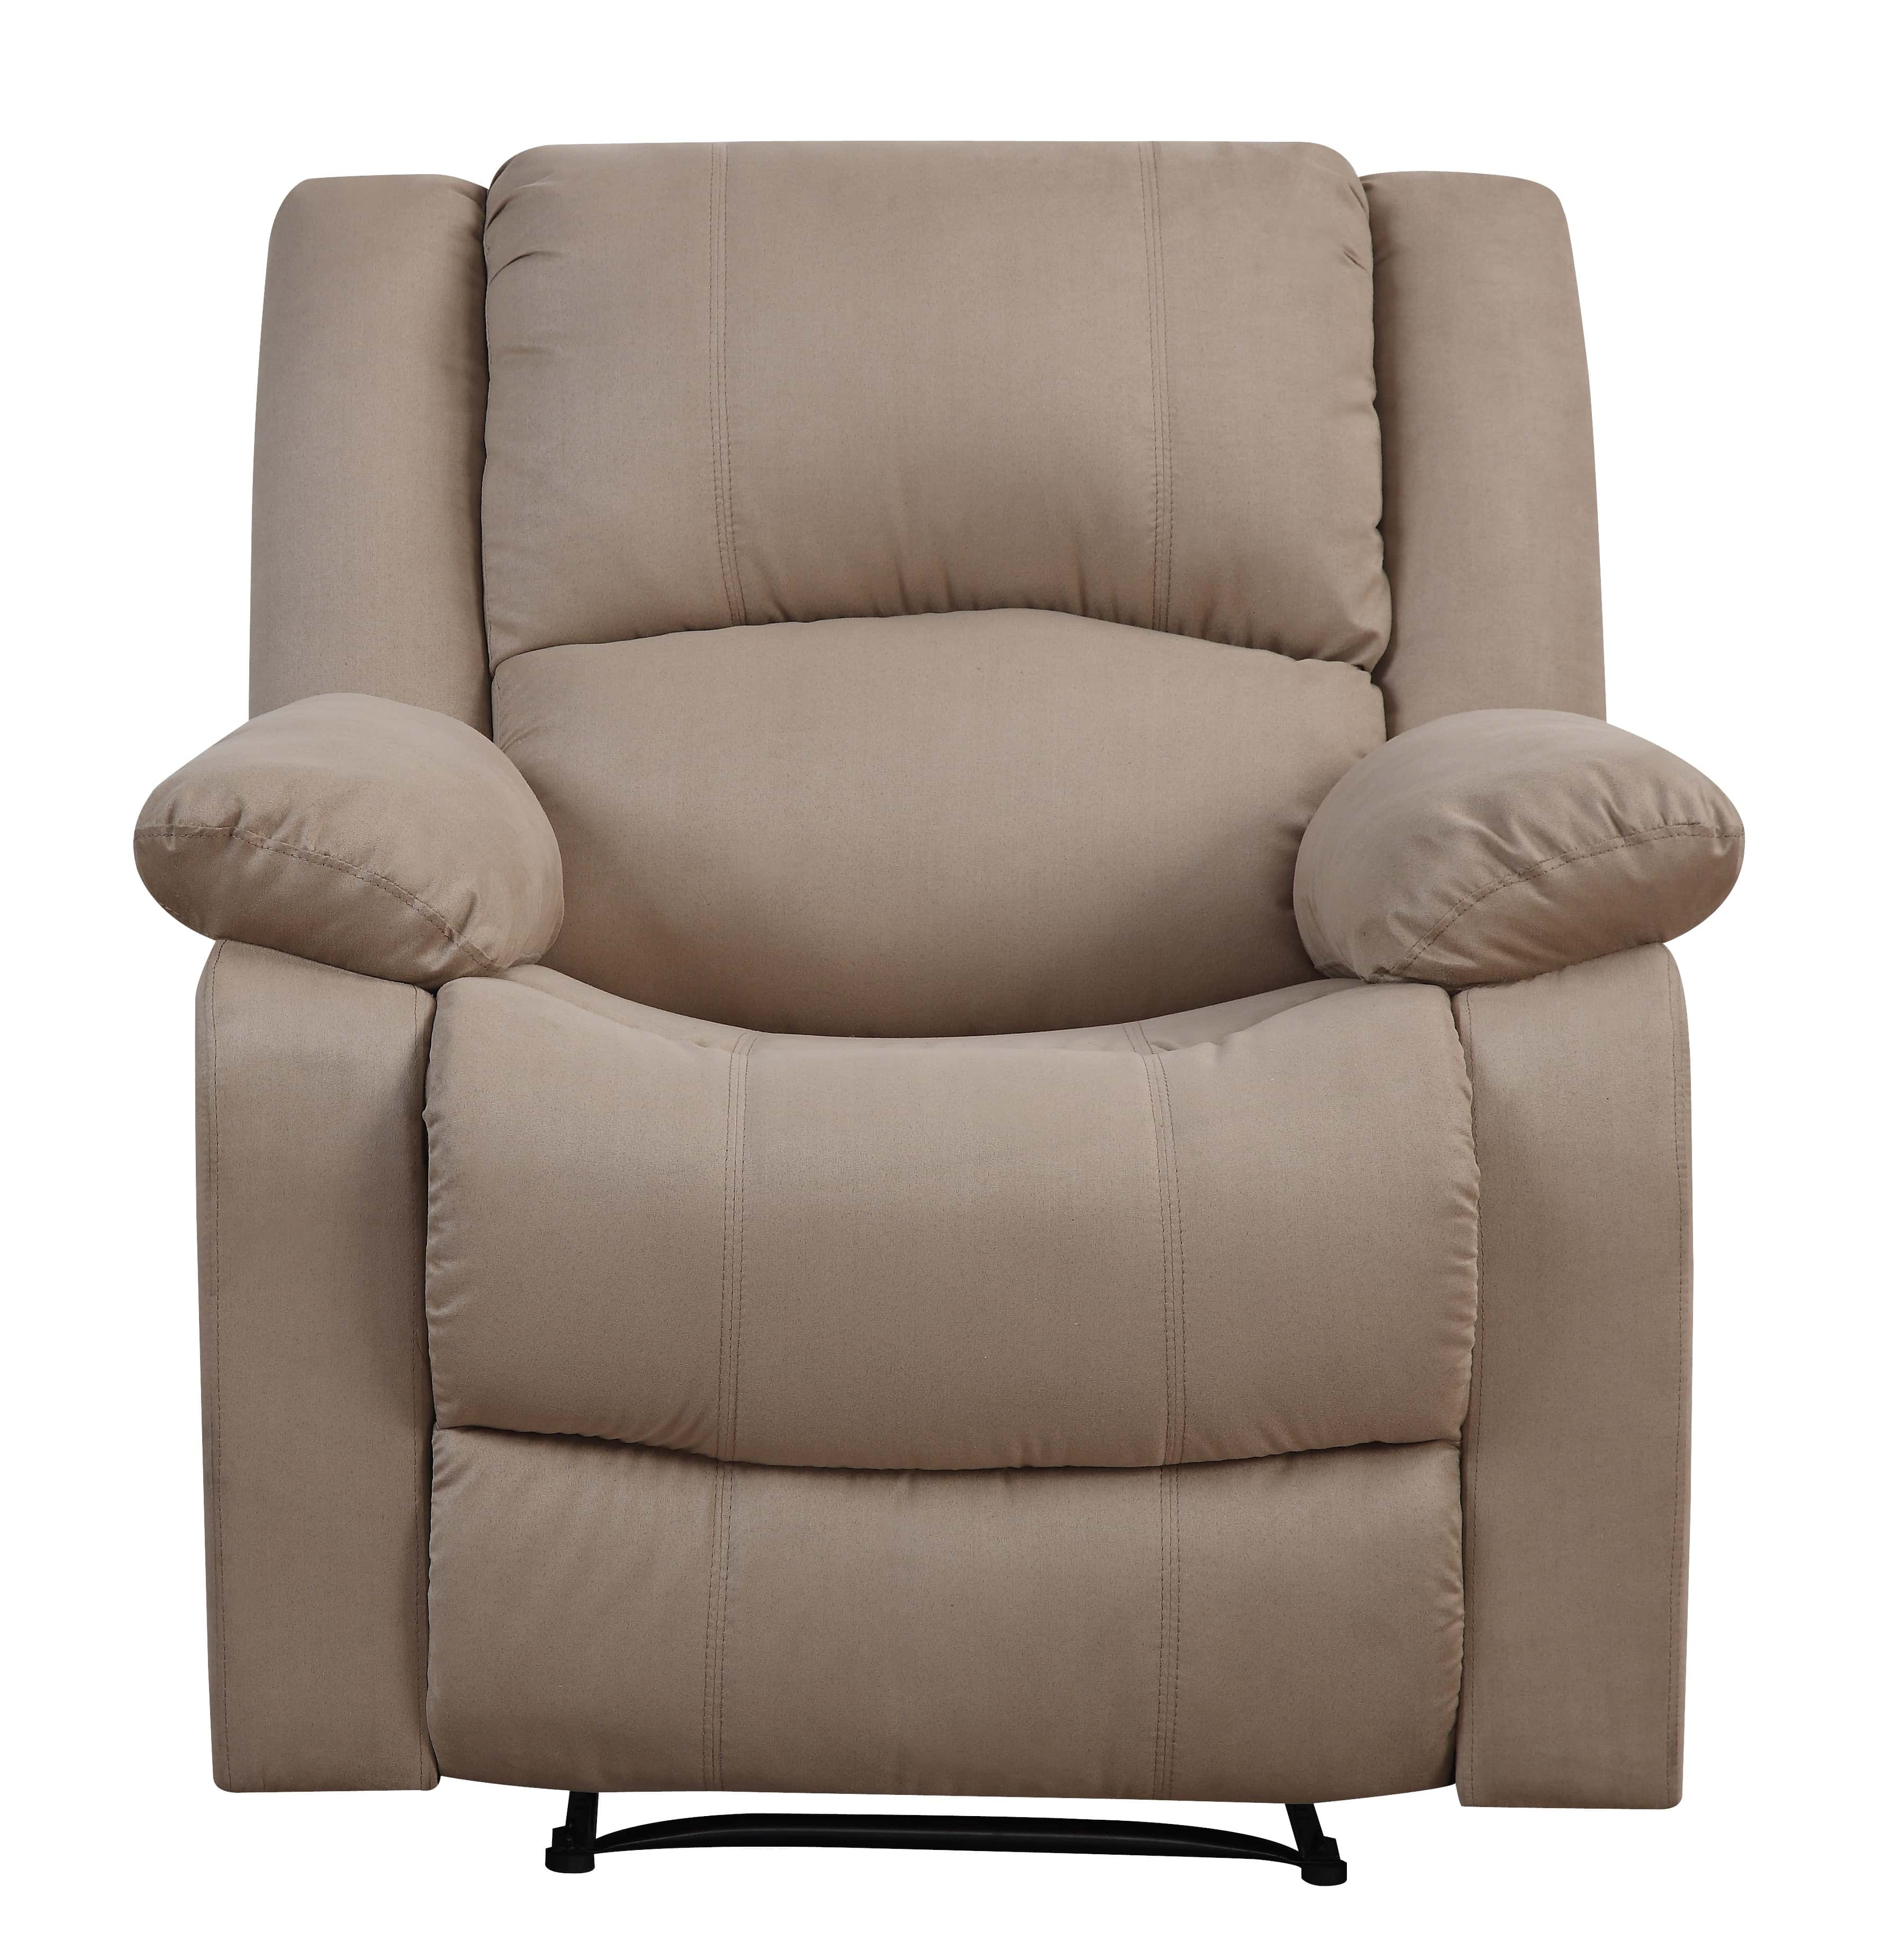 Serta Parker Beige Microfiber Recliner Chair By Lifestyle Solutions